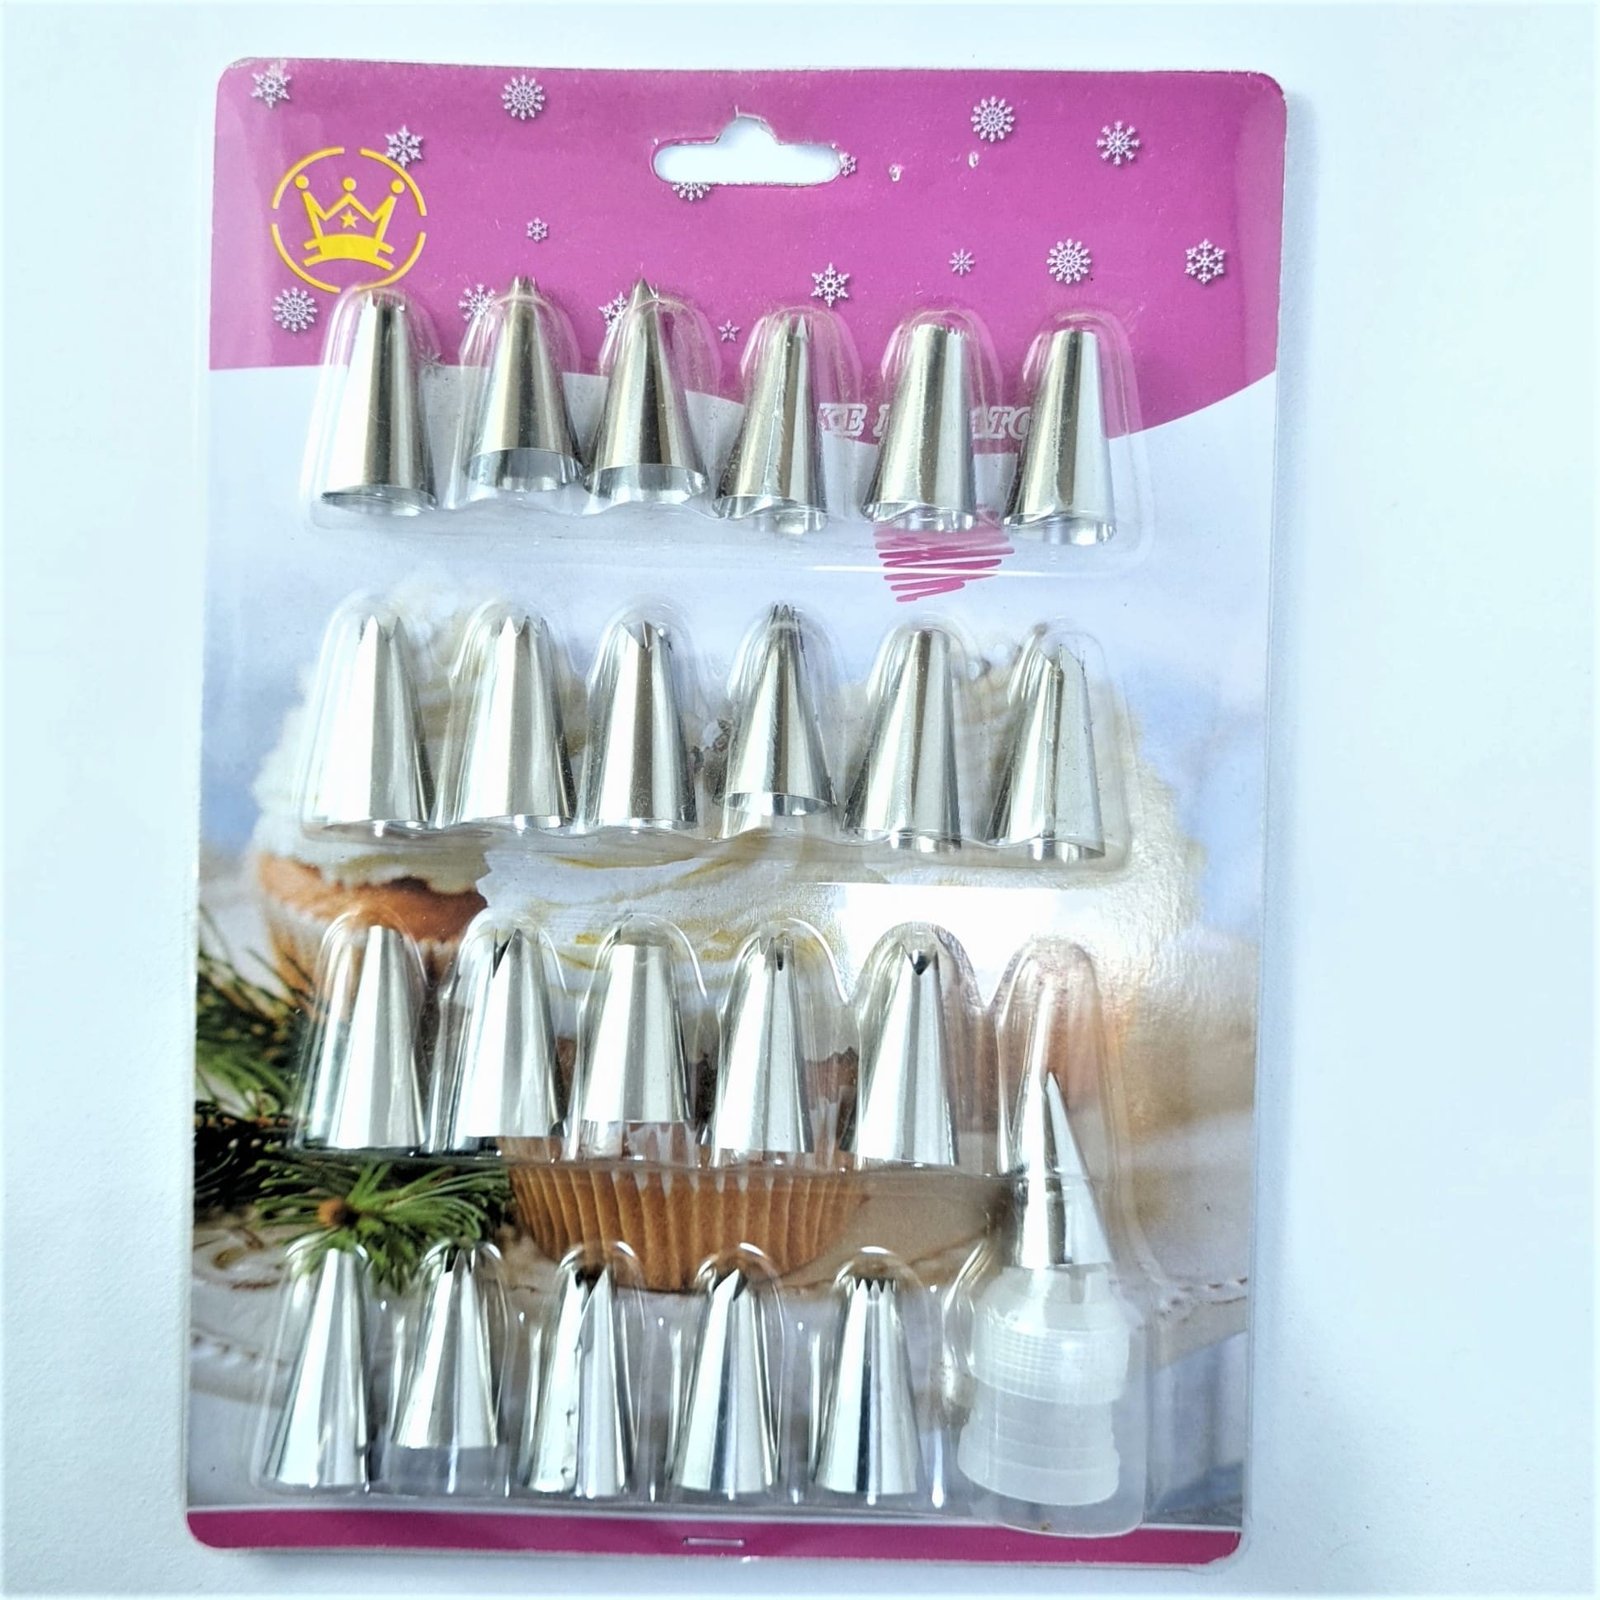 Bulky Buzz;Best of Baking 134+190+125+339+352+132+332+MA1 Rose Flower Piping  Nozzles Stainless Steel Tip Stainless Steel Multi-opening Icing Nozzle  Price in India - Buy Bulky Buzz;Best of Baking  134+190+125+339+352+132+332+MA1 Rose Flower Piping ...